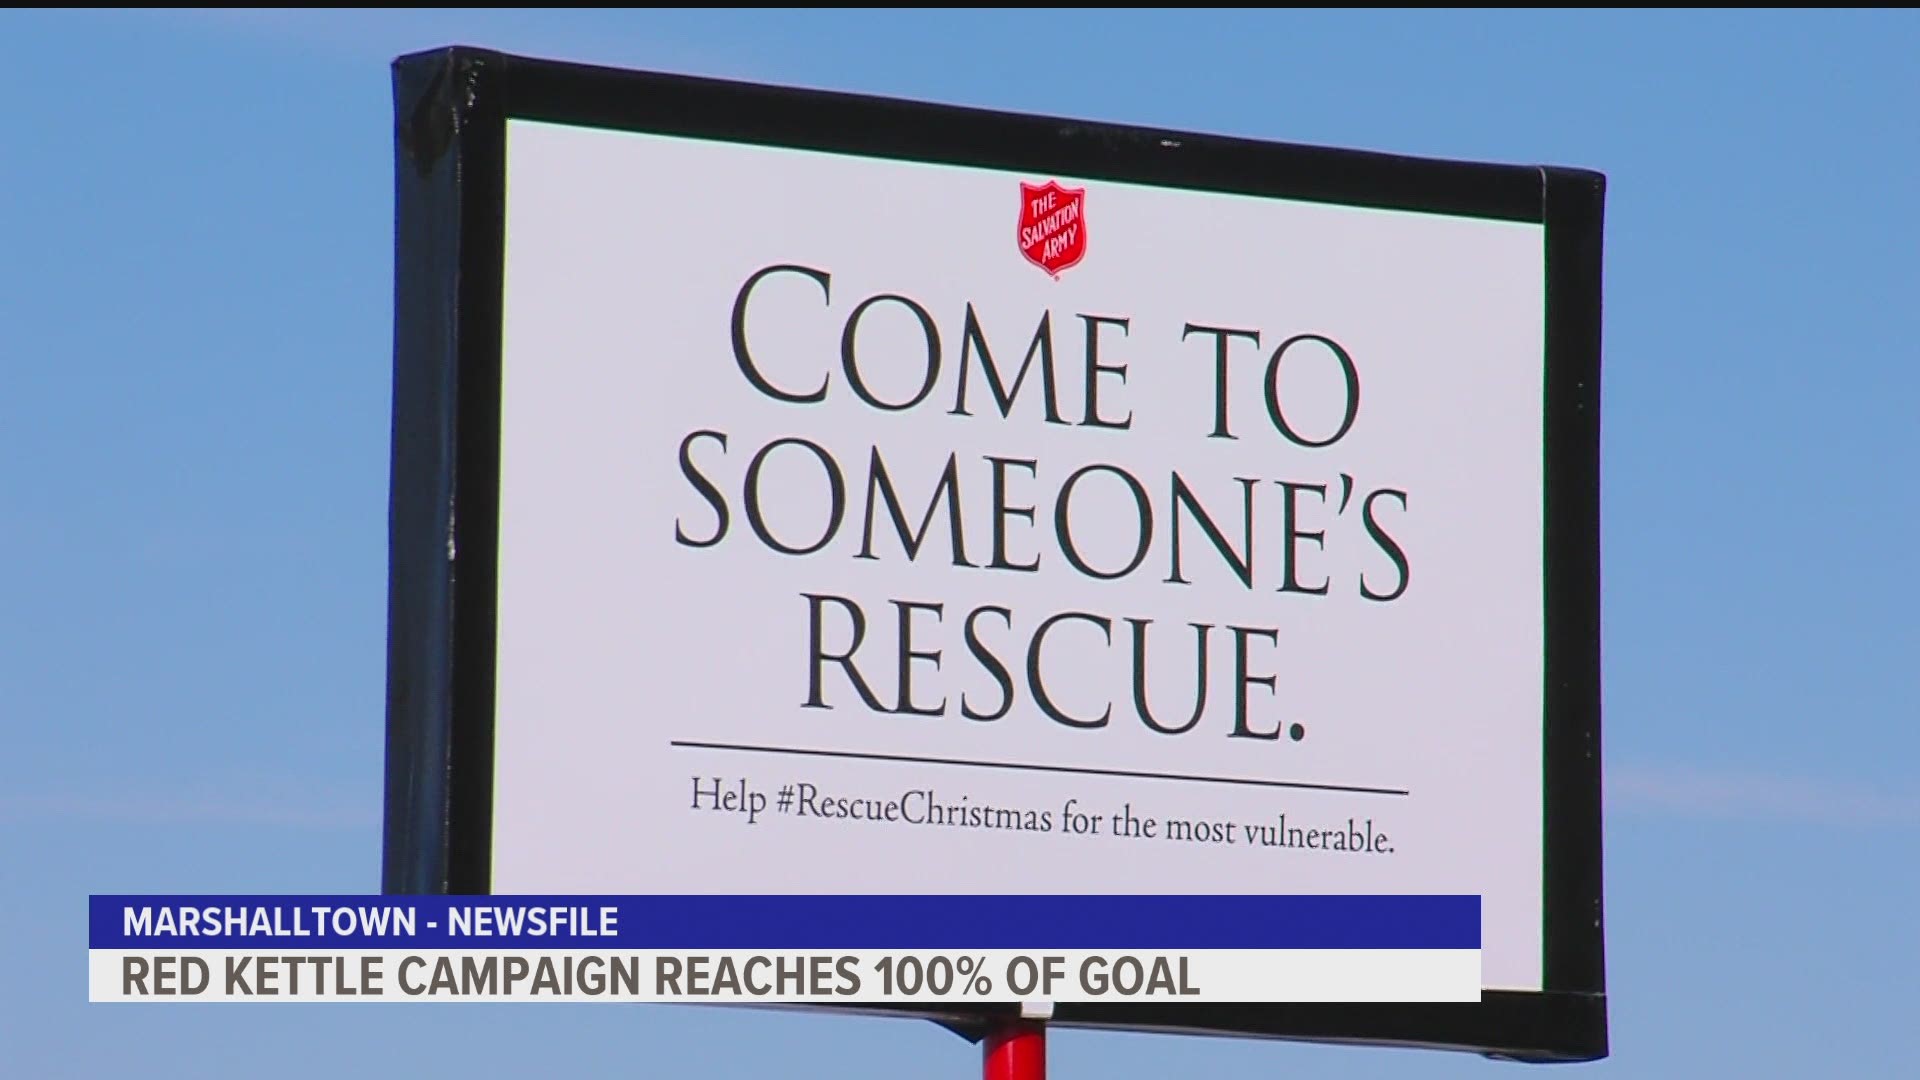 The Salvation Army's Red Kettle Campaign goal is met in Marshalltown